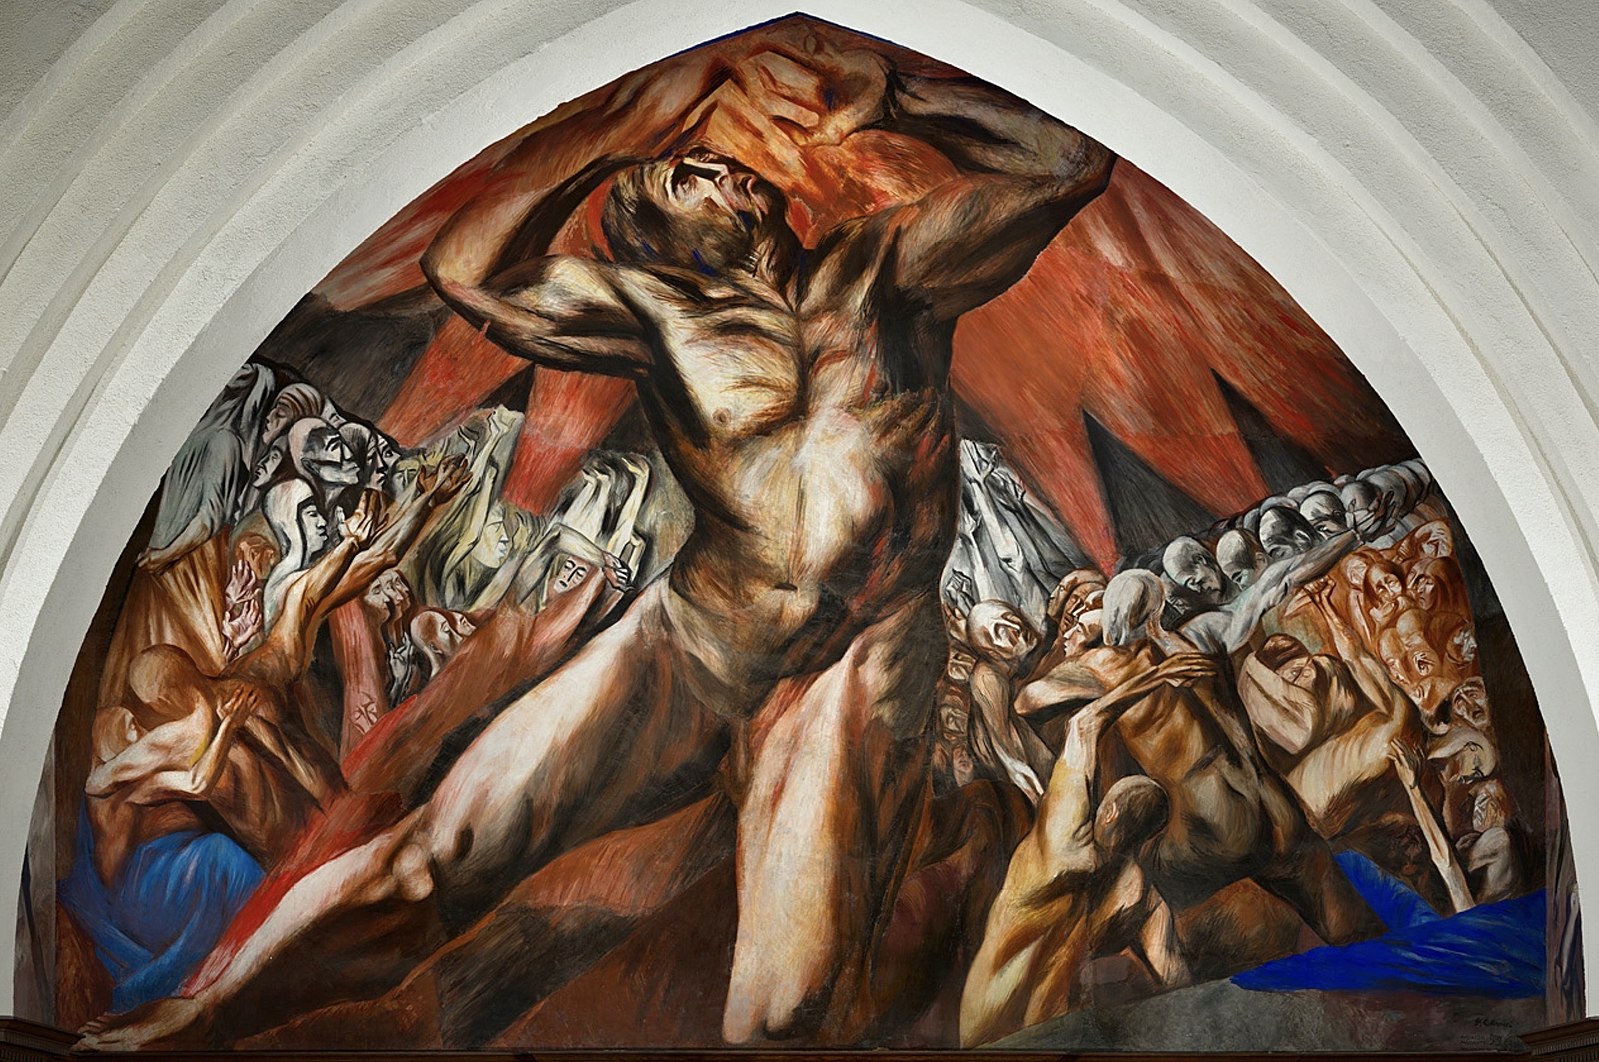 A nude man in the center and several people in the background